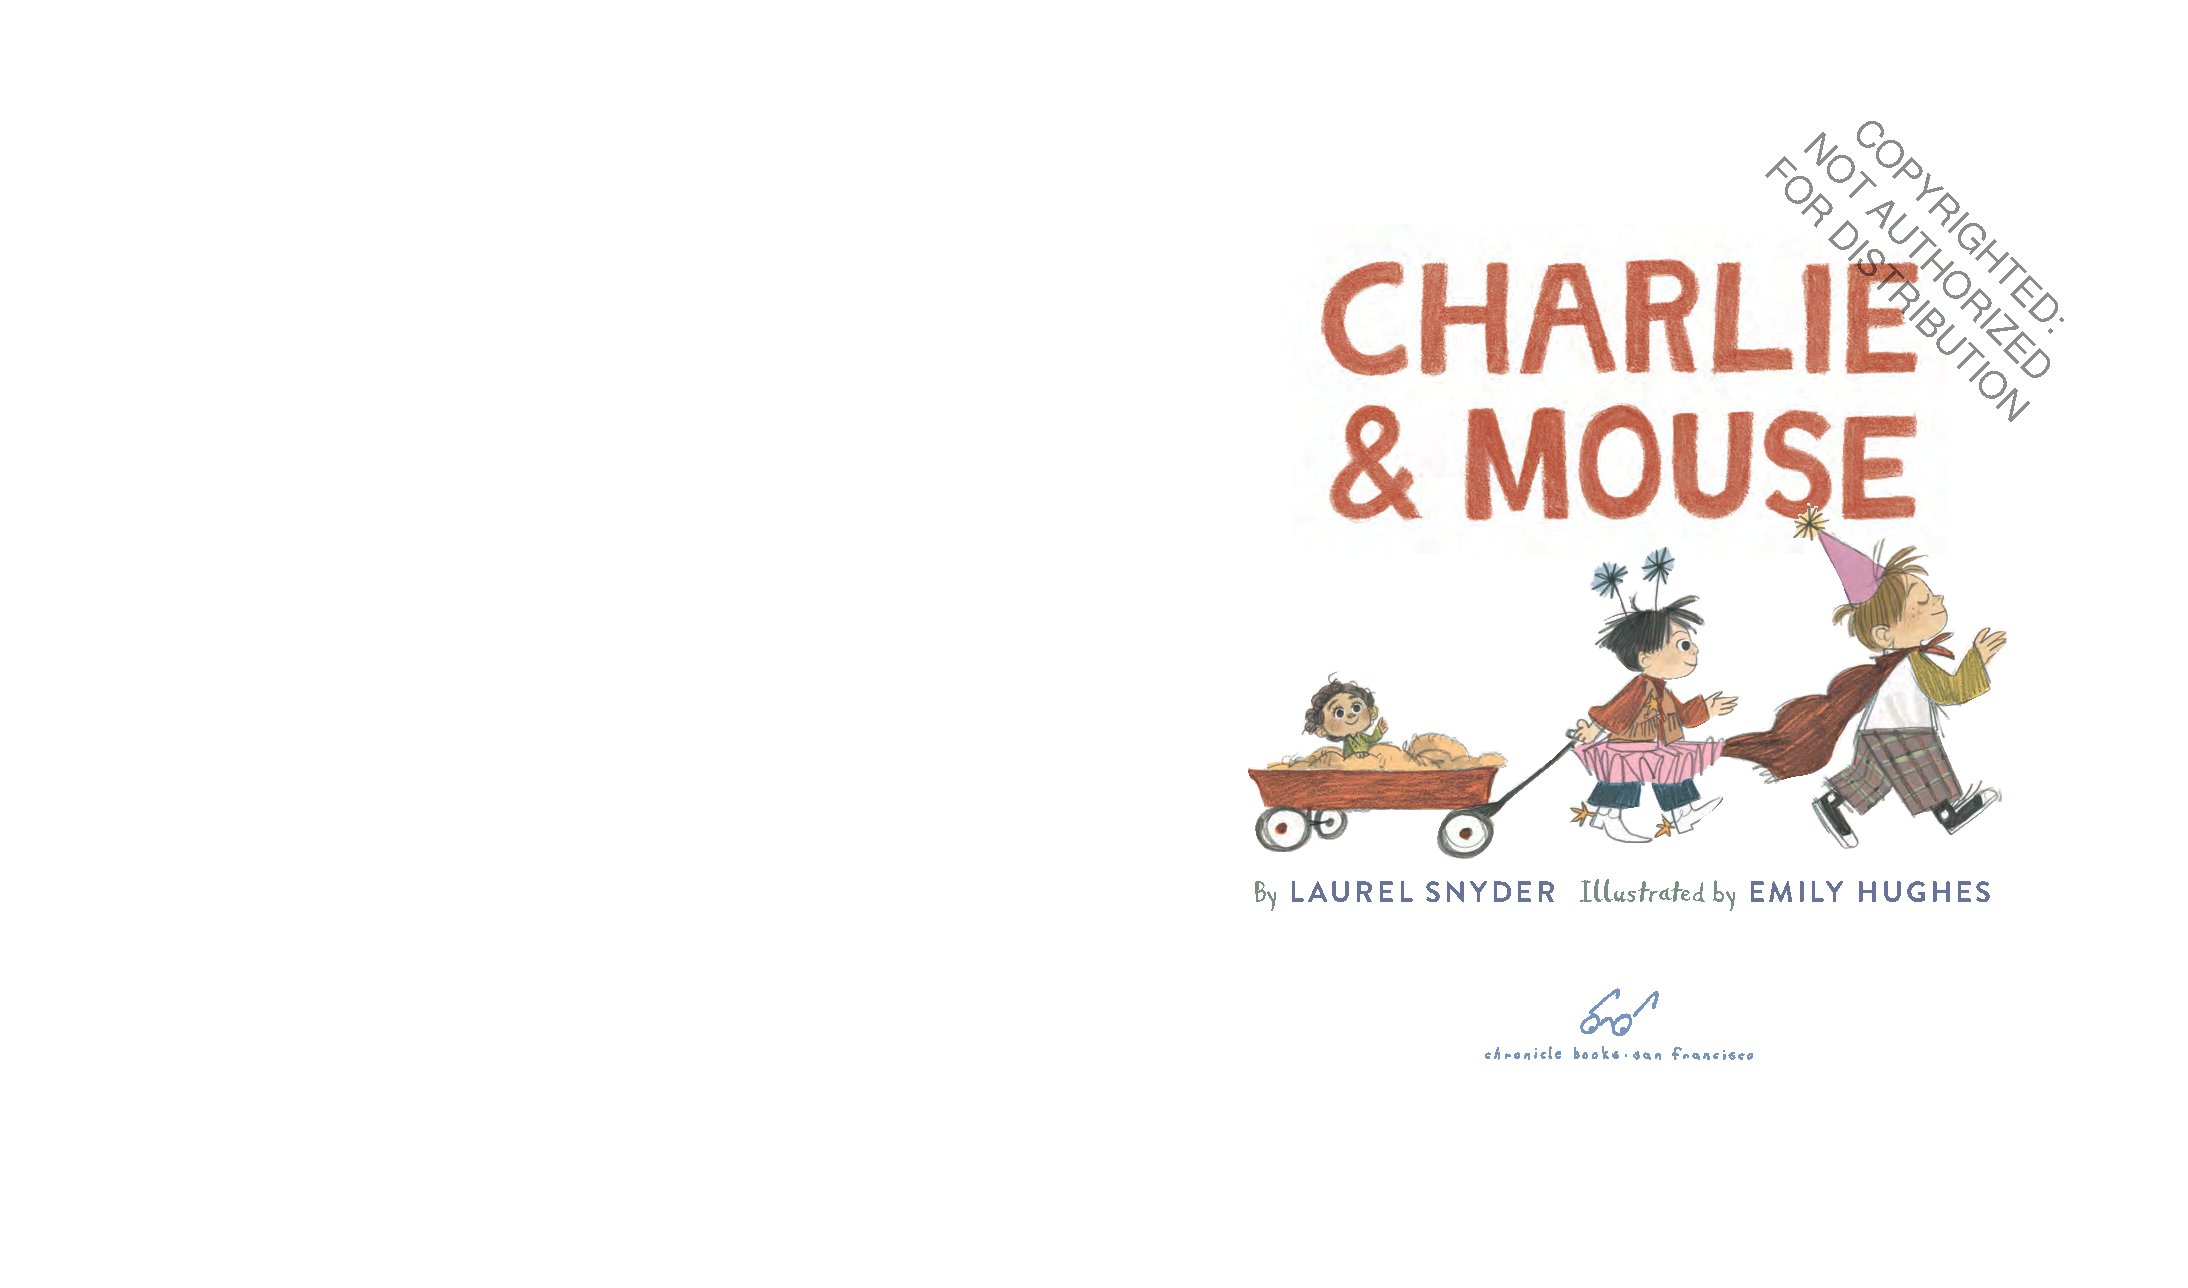 Charlie & Mouse: Book 1 (Classic Children's Book, Illustrated Books for Children)